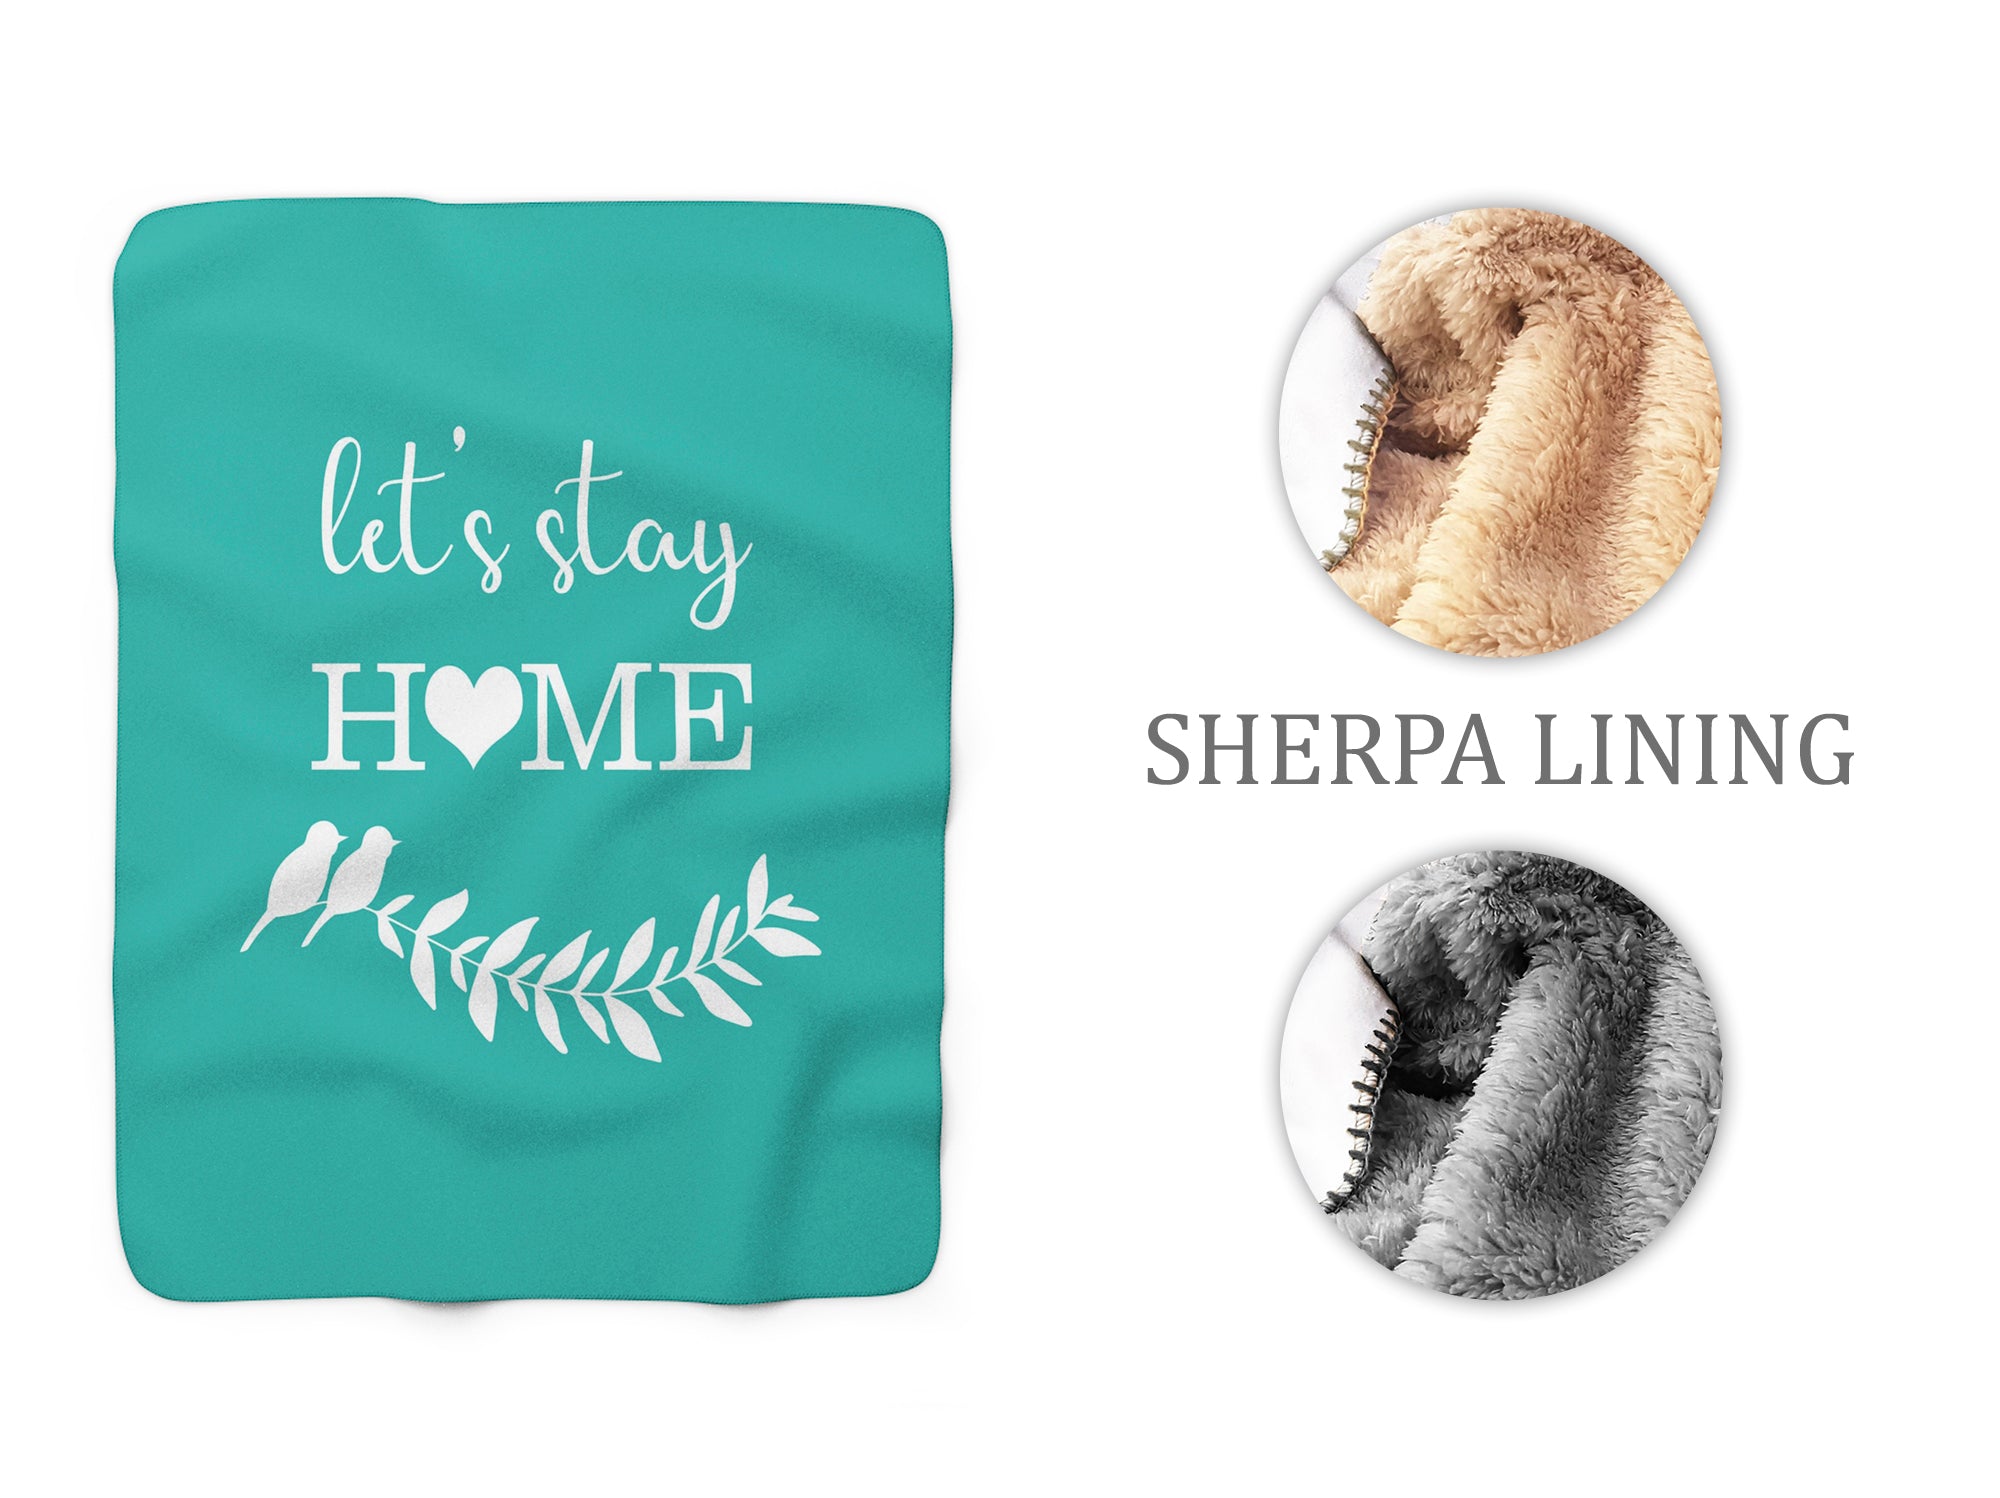 Let's Stay Home Teal Throw Blanket, Outdoor Sherpa Fleece Blanket, Love Birds Camping Blanket, Teal Bedding, Turquoise Blanket - SFB15